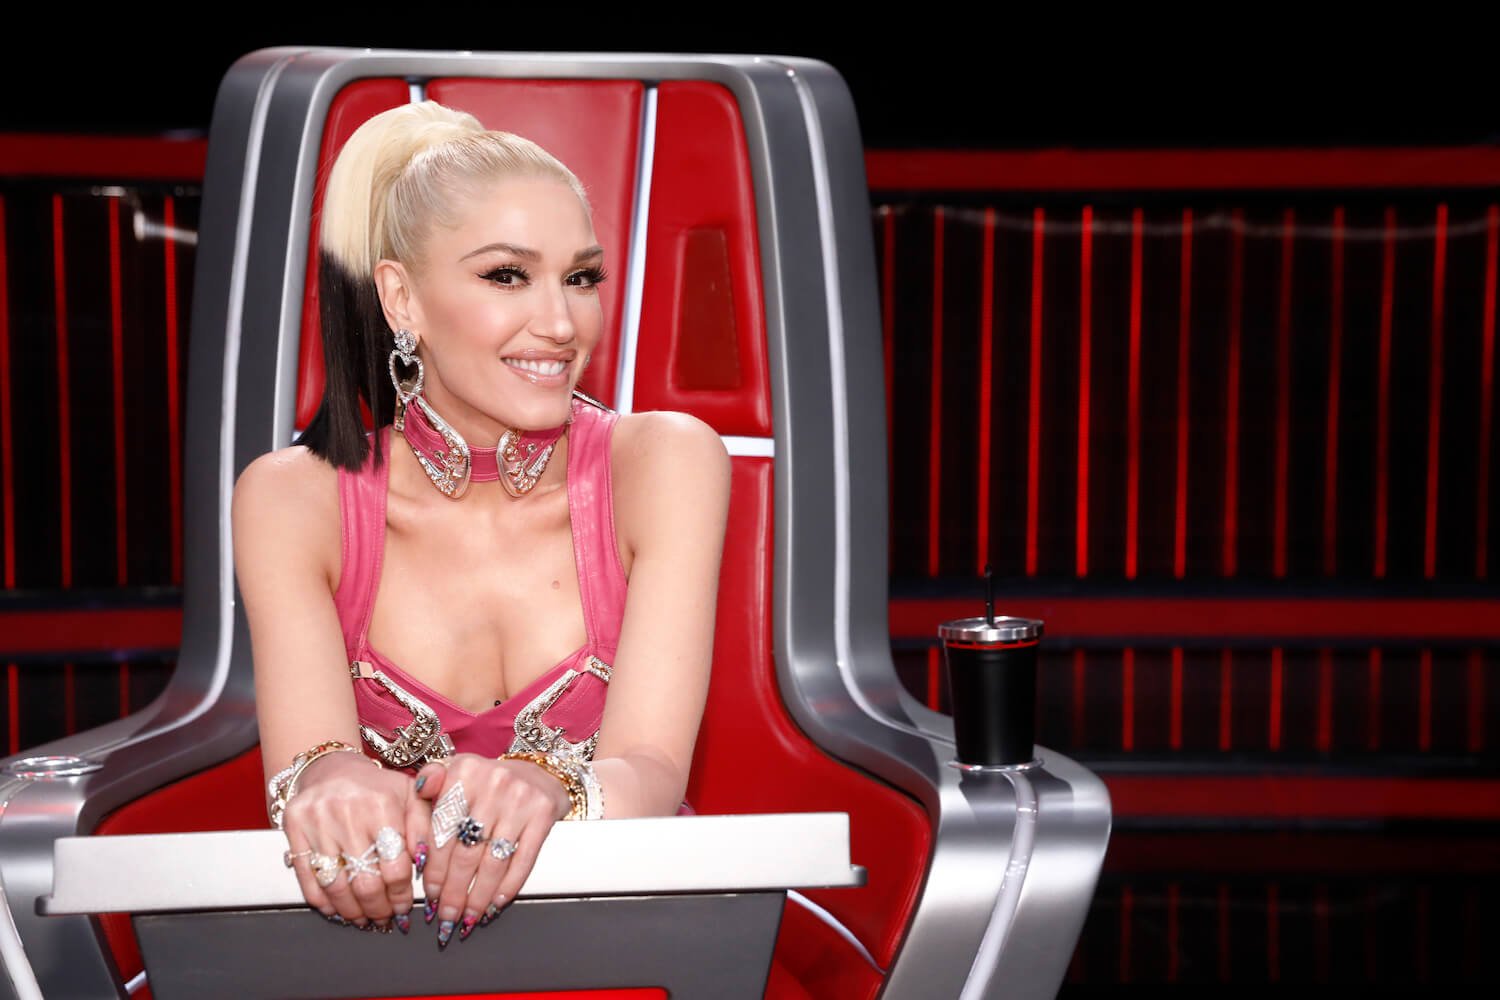 'The Voice' Season 24 coach Gwen Stefani sitting in a red chair and smiling